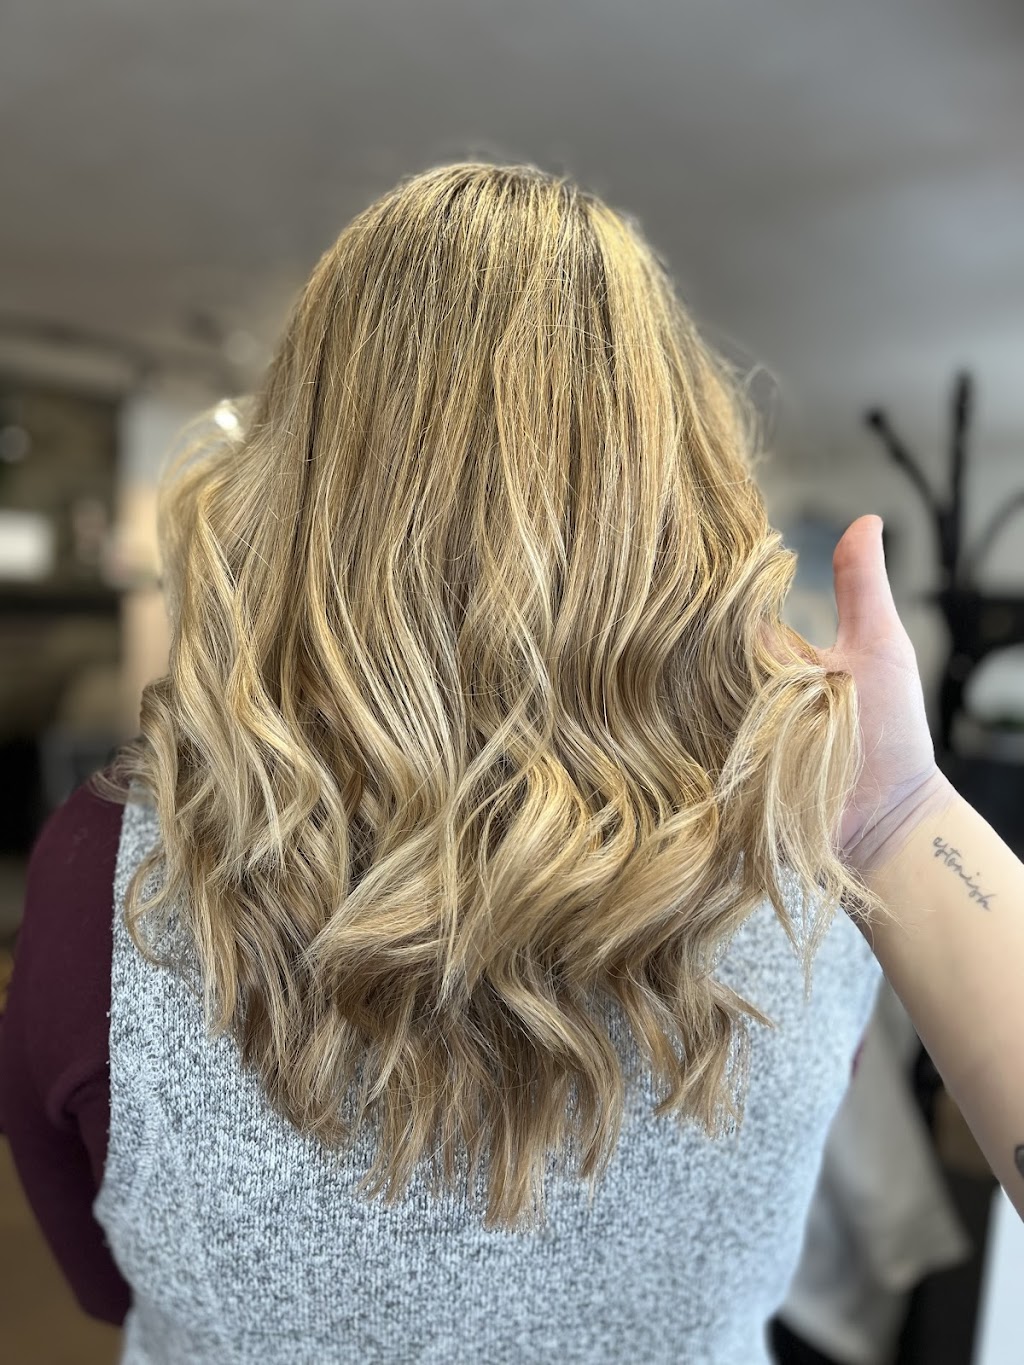 Styled With A Halo | 1121 PA-390, Cresco, PA 18326 | Phone: (570) 994-6850